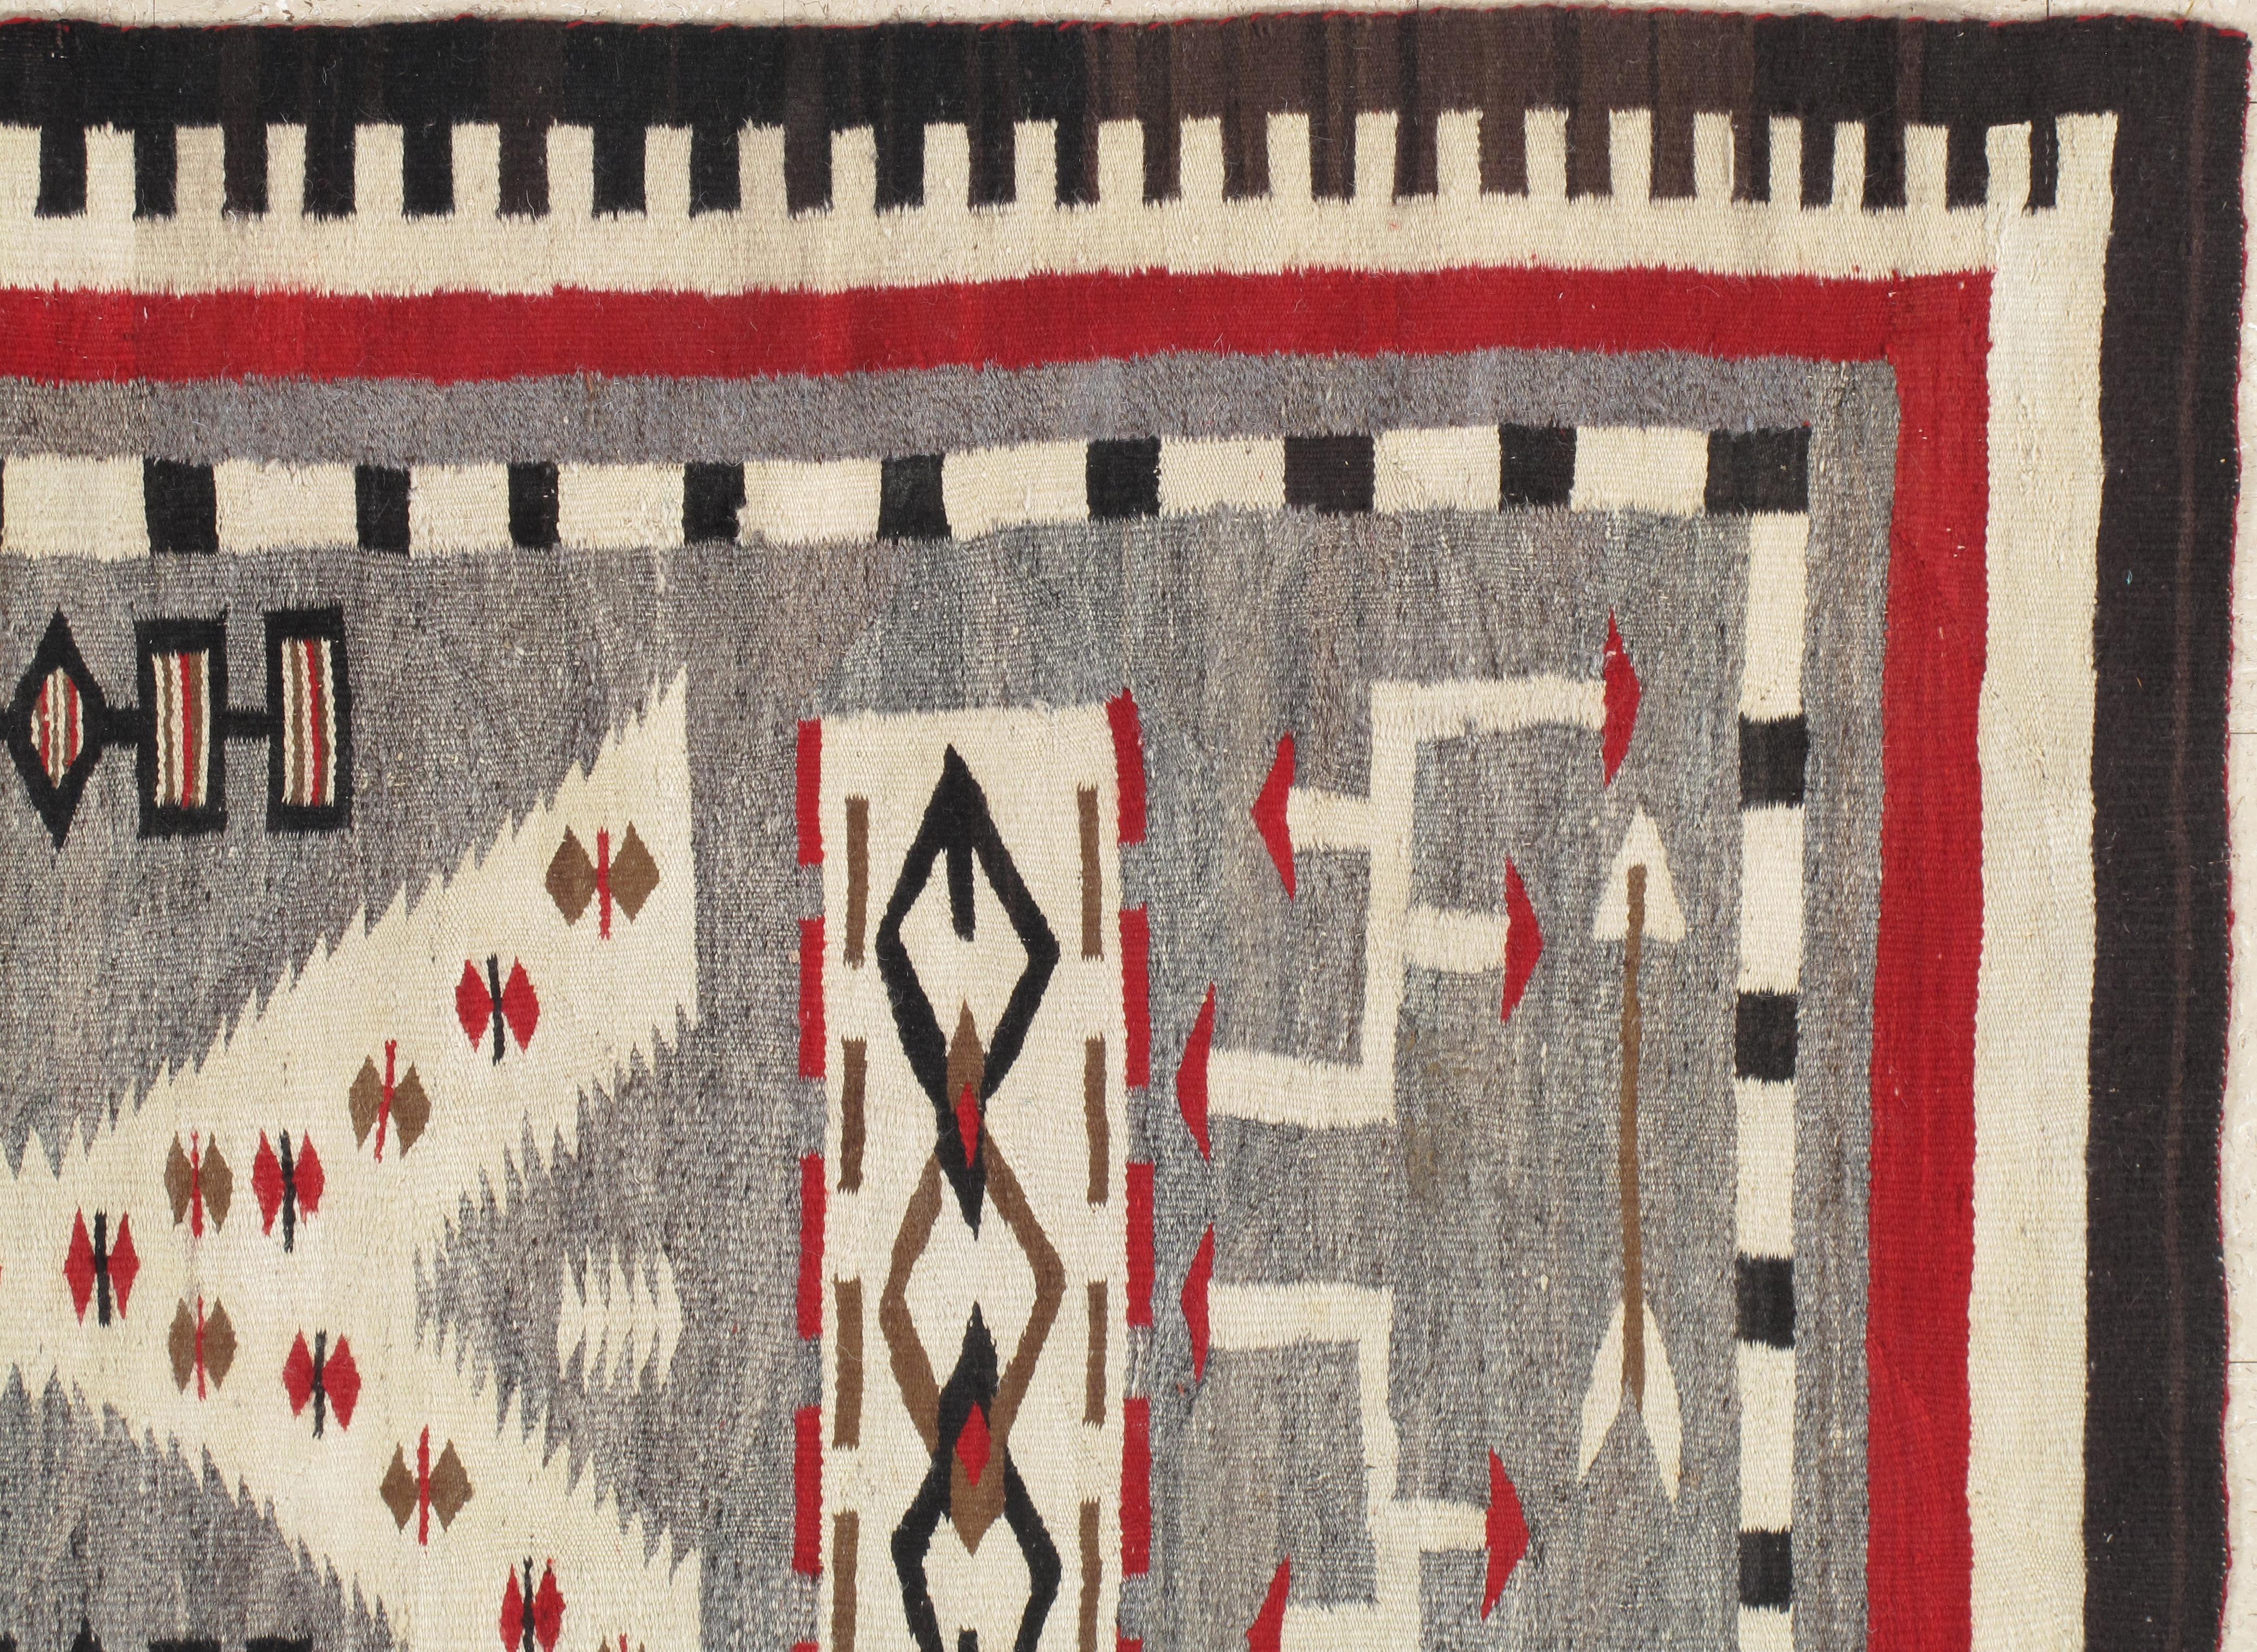 Navajo rugs and blankets are textiles produced by Navajo people of the four corners area of the United States. Navajo textiles are highly regarded and have been sought after as trade items for over 150 years. These rugs and blankets are prized by